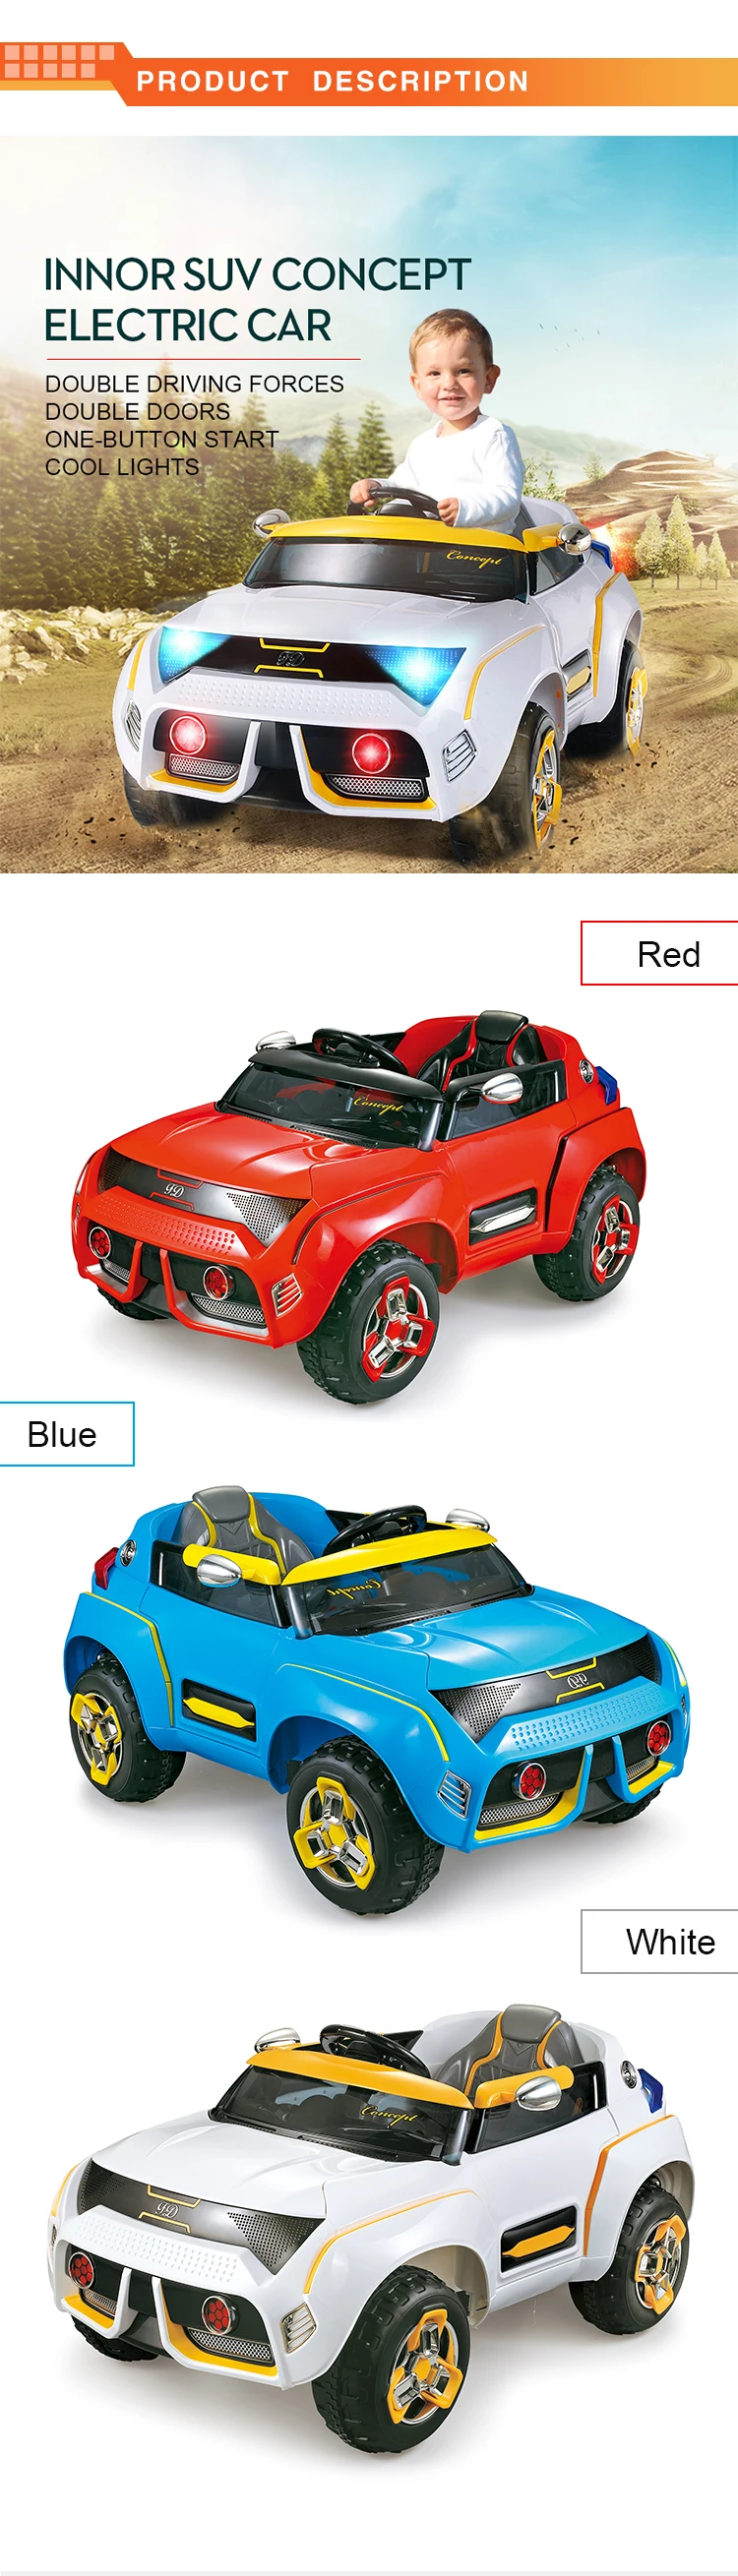 Children 12V battery operated car remote control ride on car with light and music horn sound